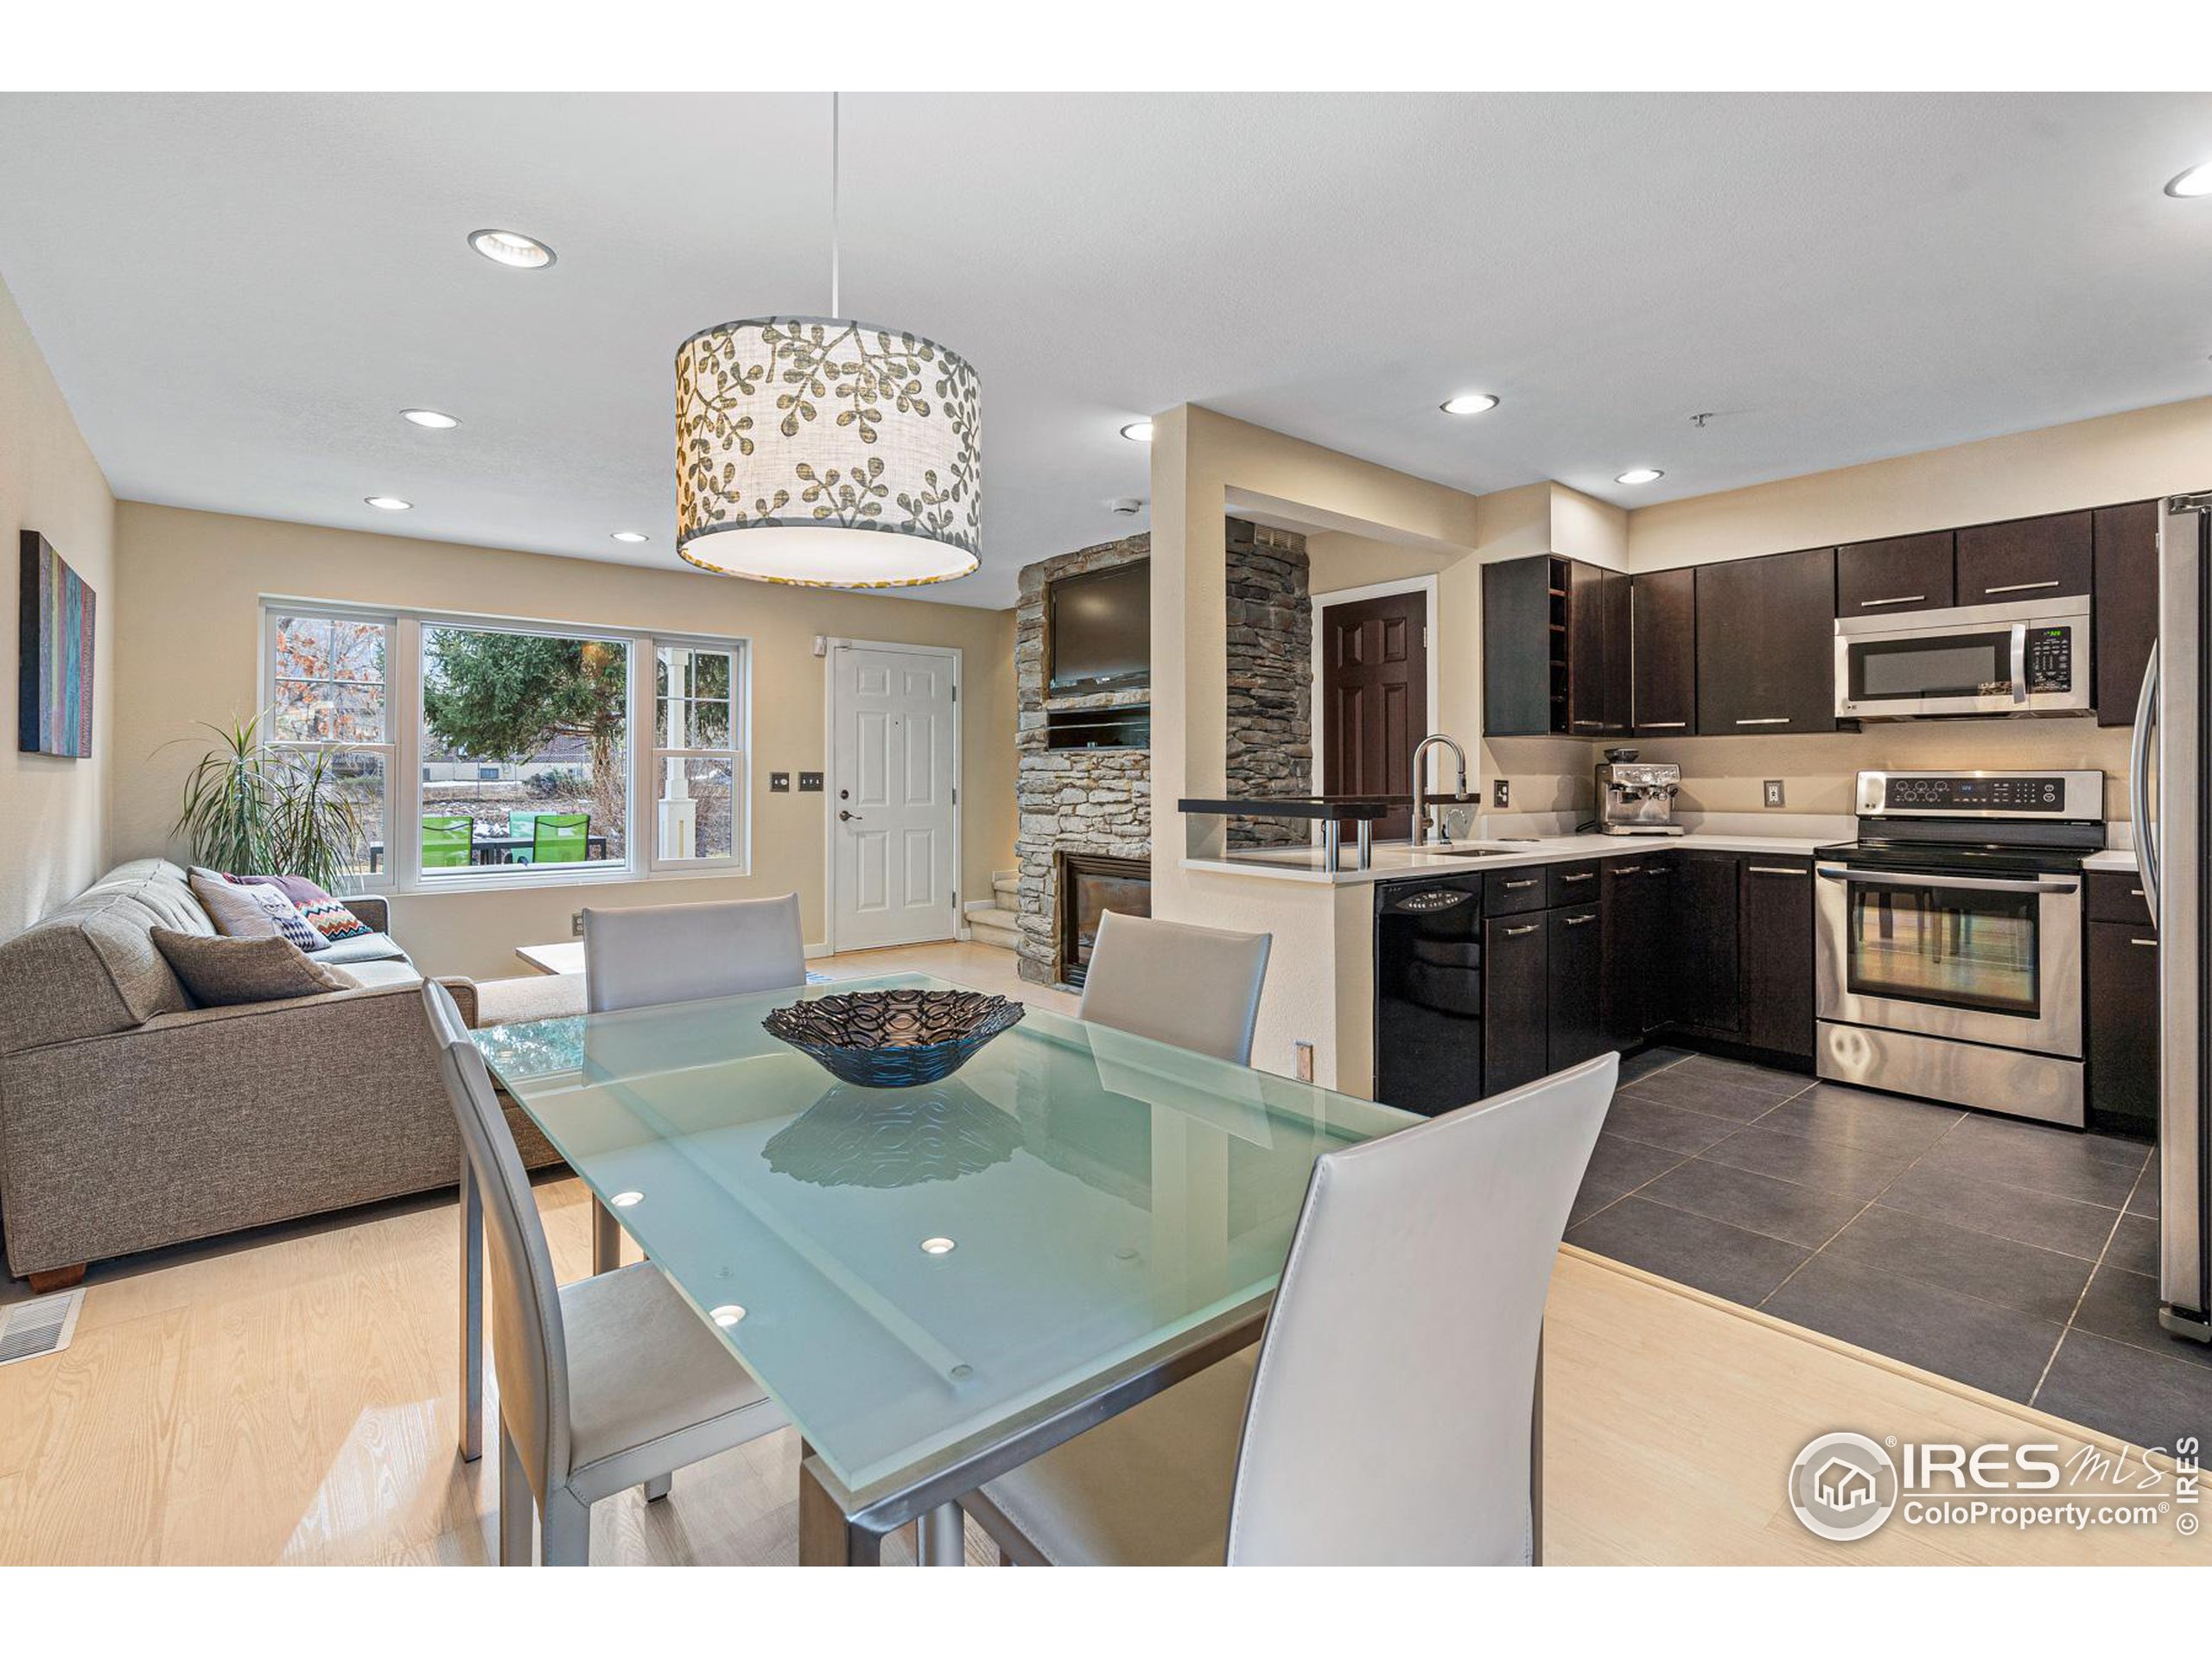 a living room with stainless steel appliances kitchen island granite countertop furniture and a view of kitchen